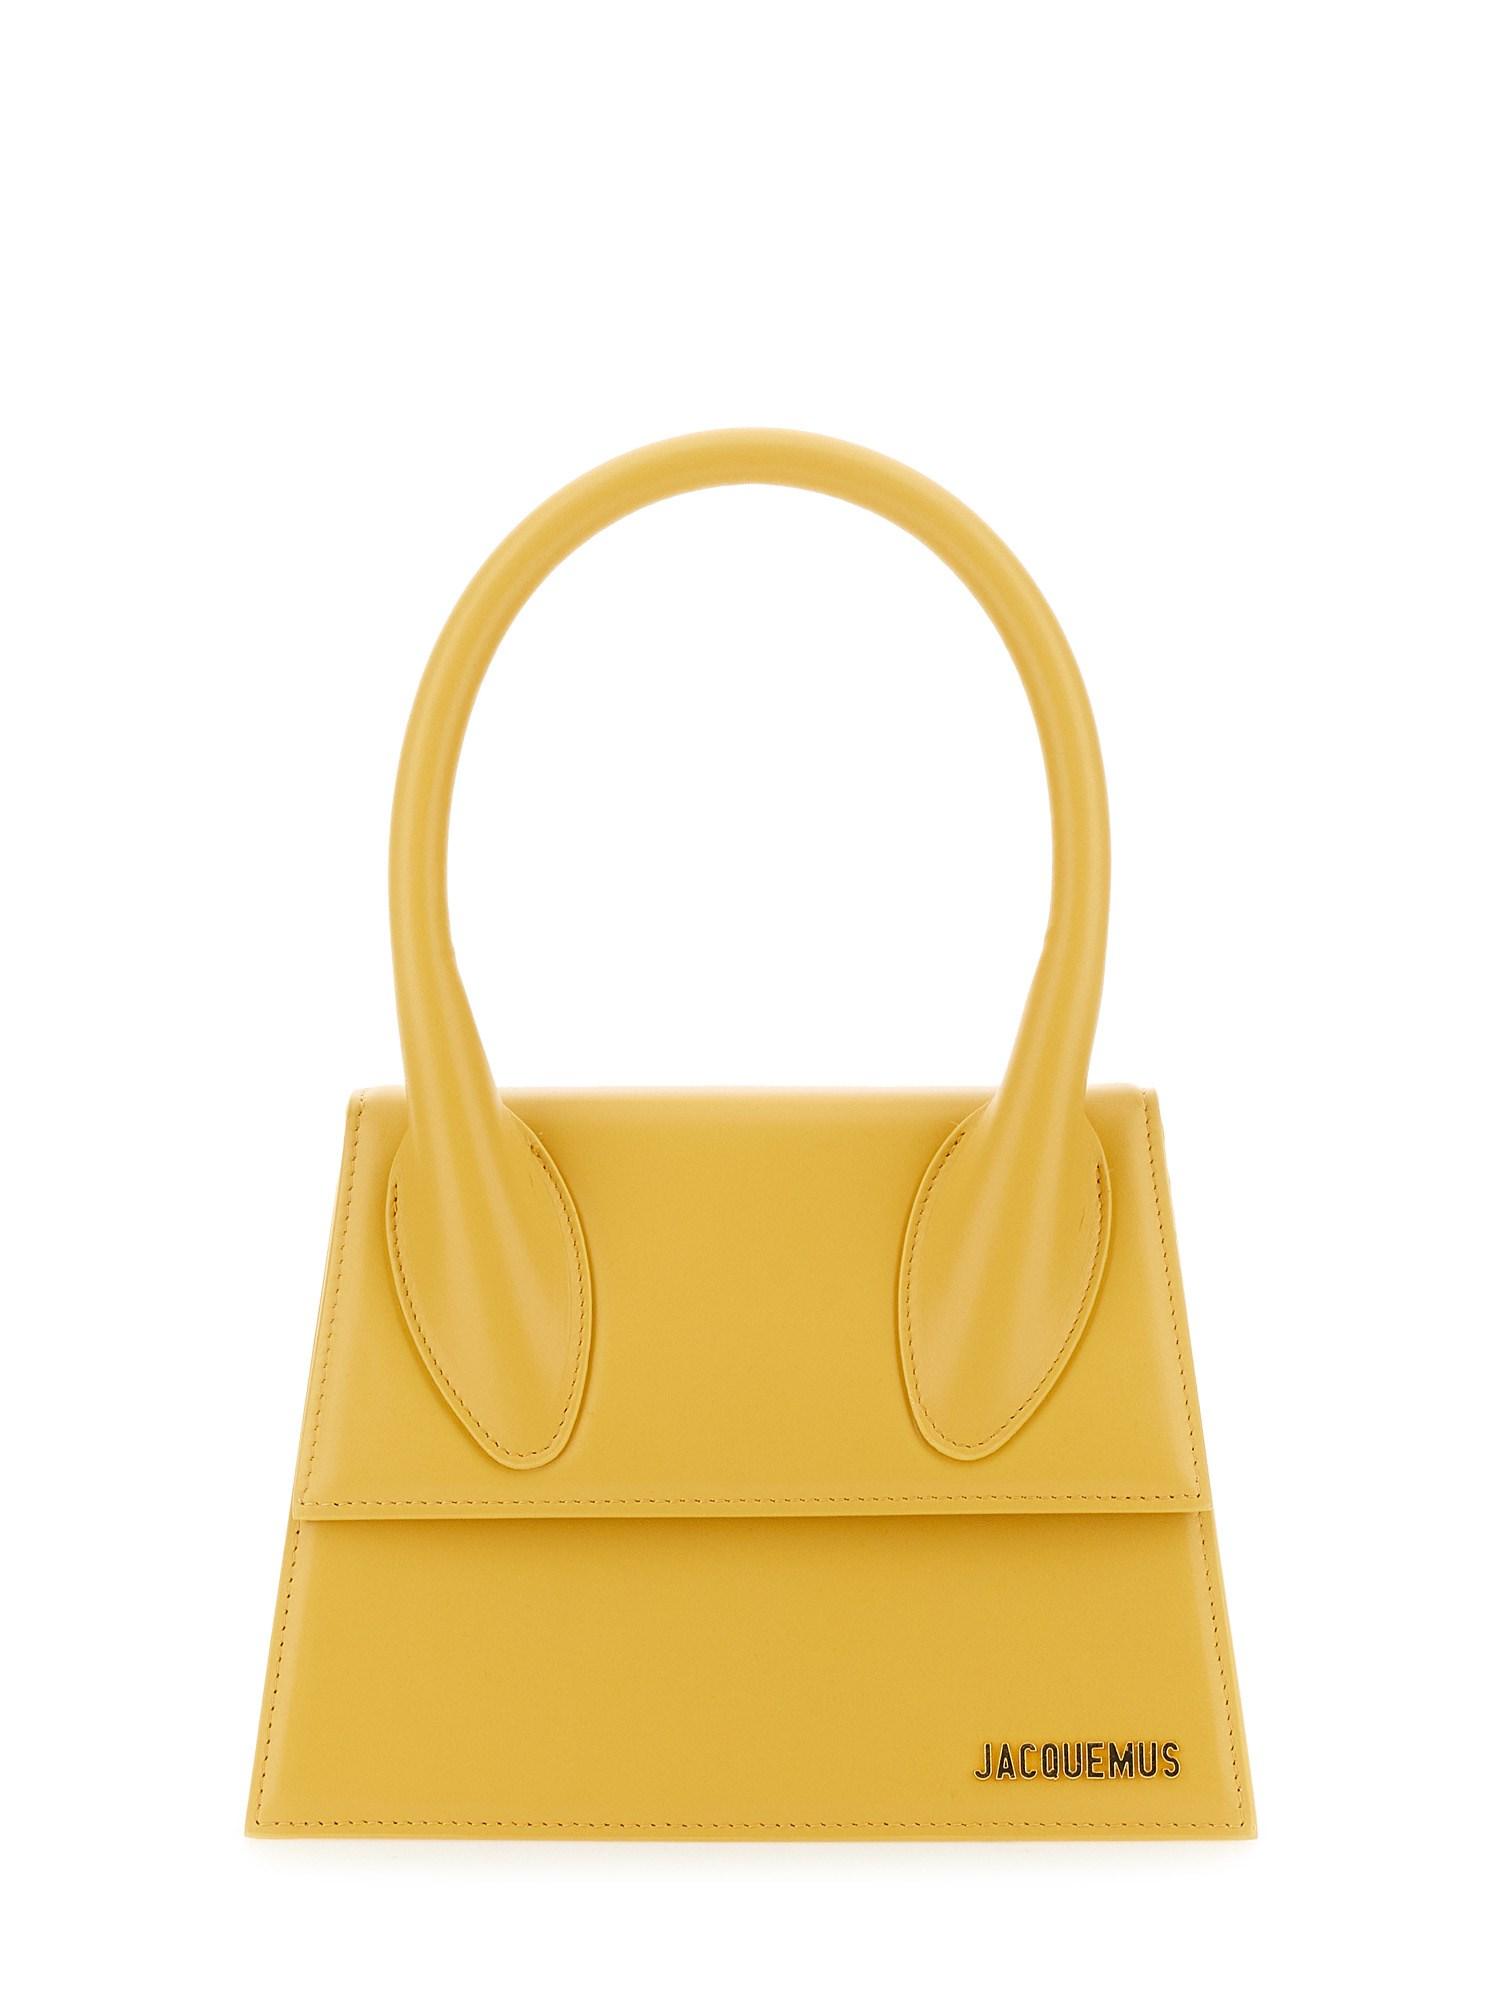 Jacquemus Le Grand Chiquito Bag in Yellow | Lyst